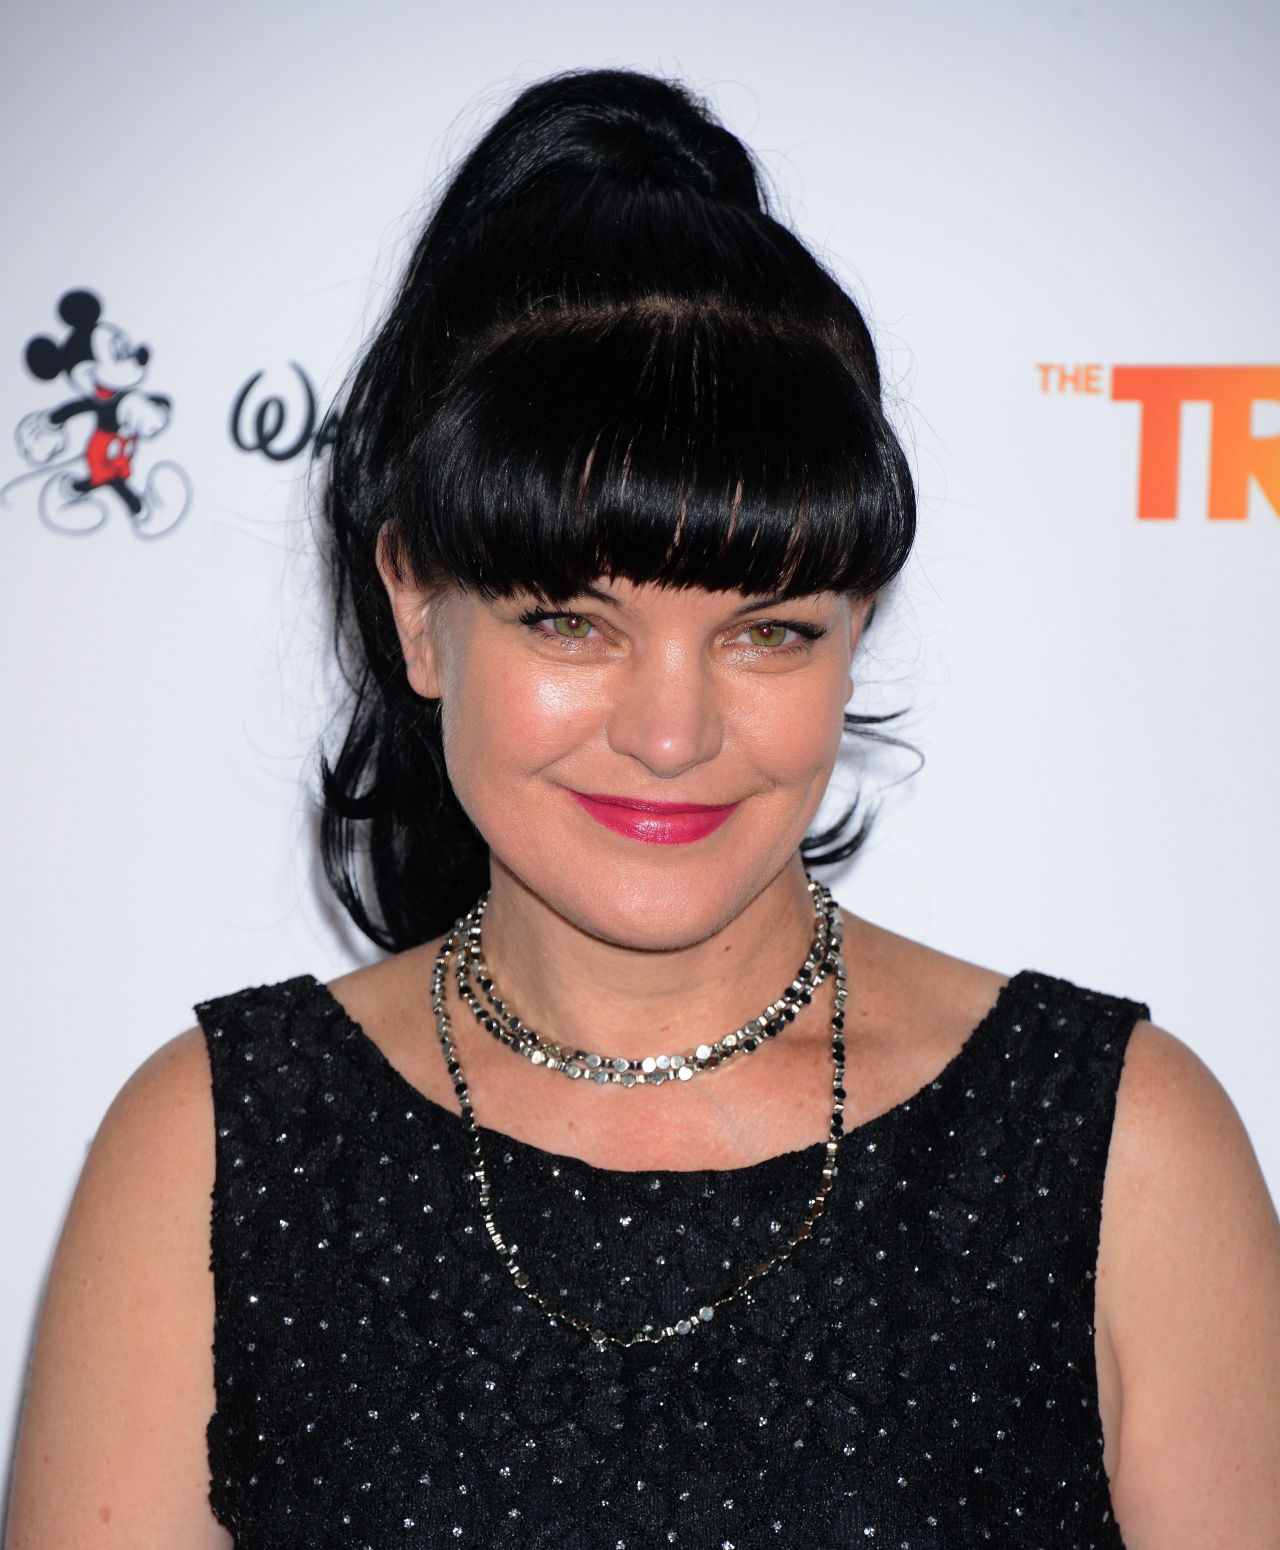 Pauley Perrette From NCIS Stay At Home Tips During COVID19